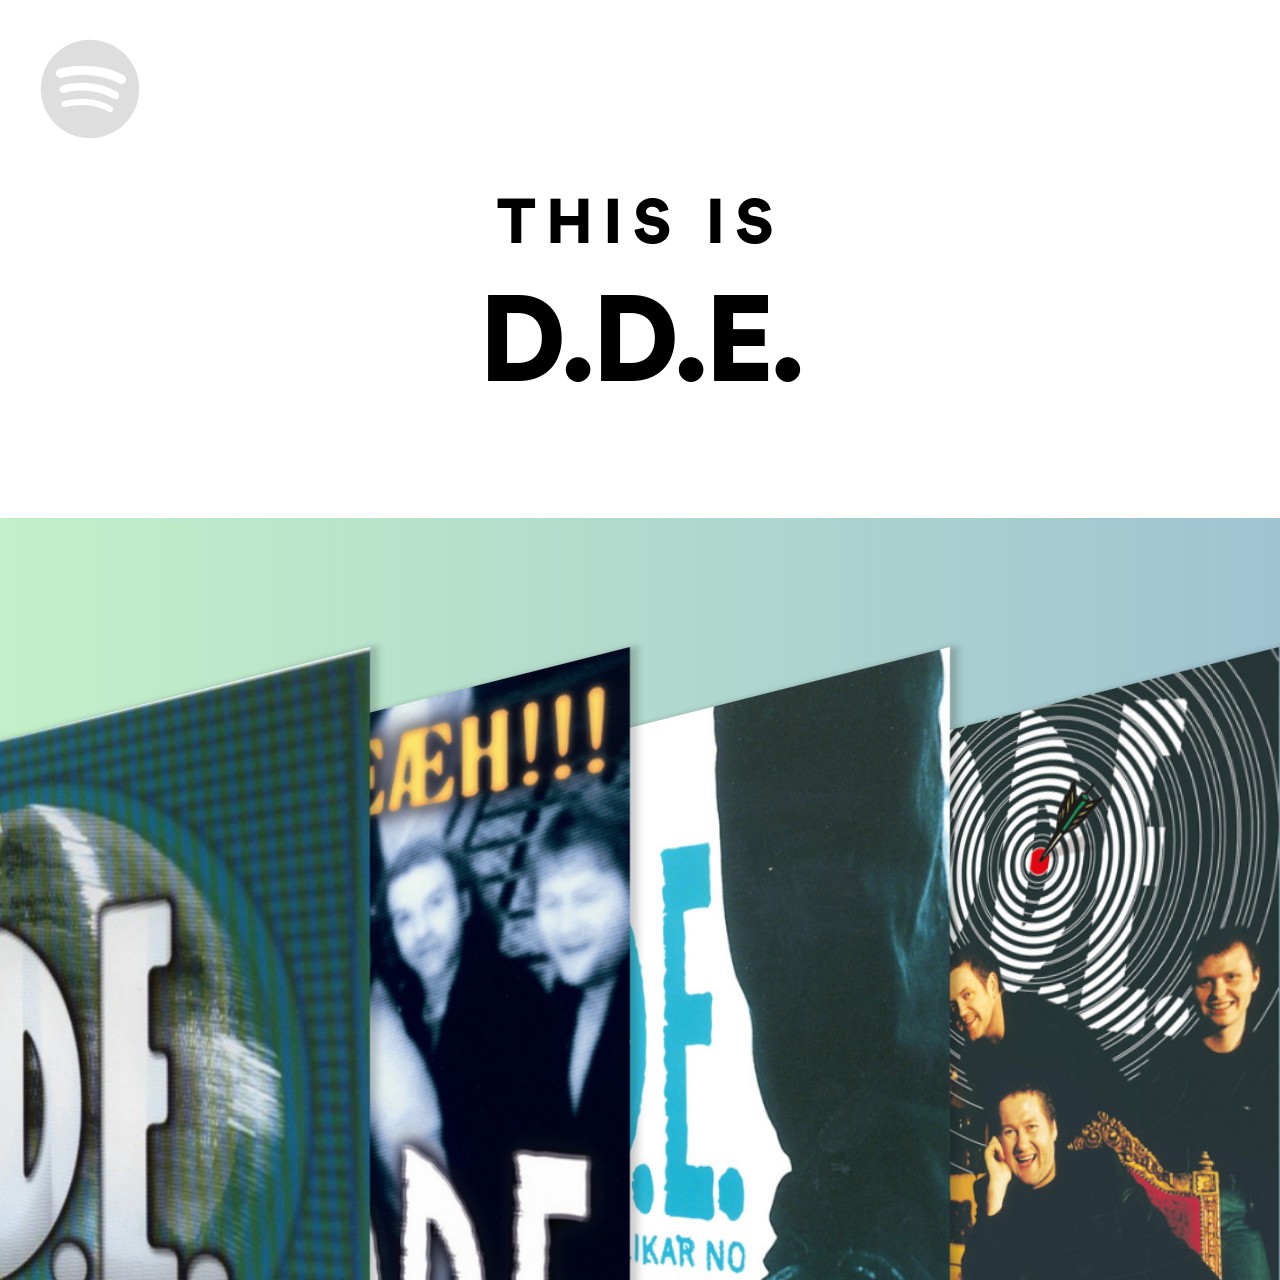 This Is D.D.E. by spotify Spotify Playlist